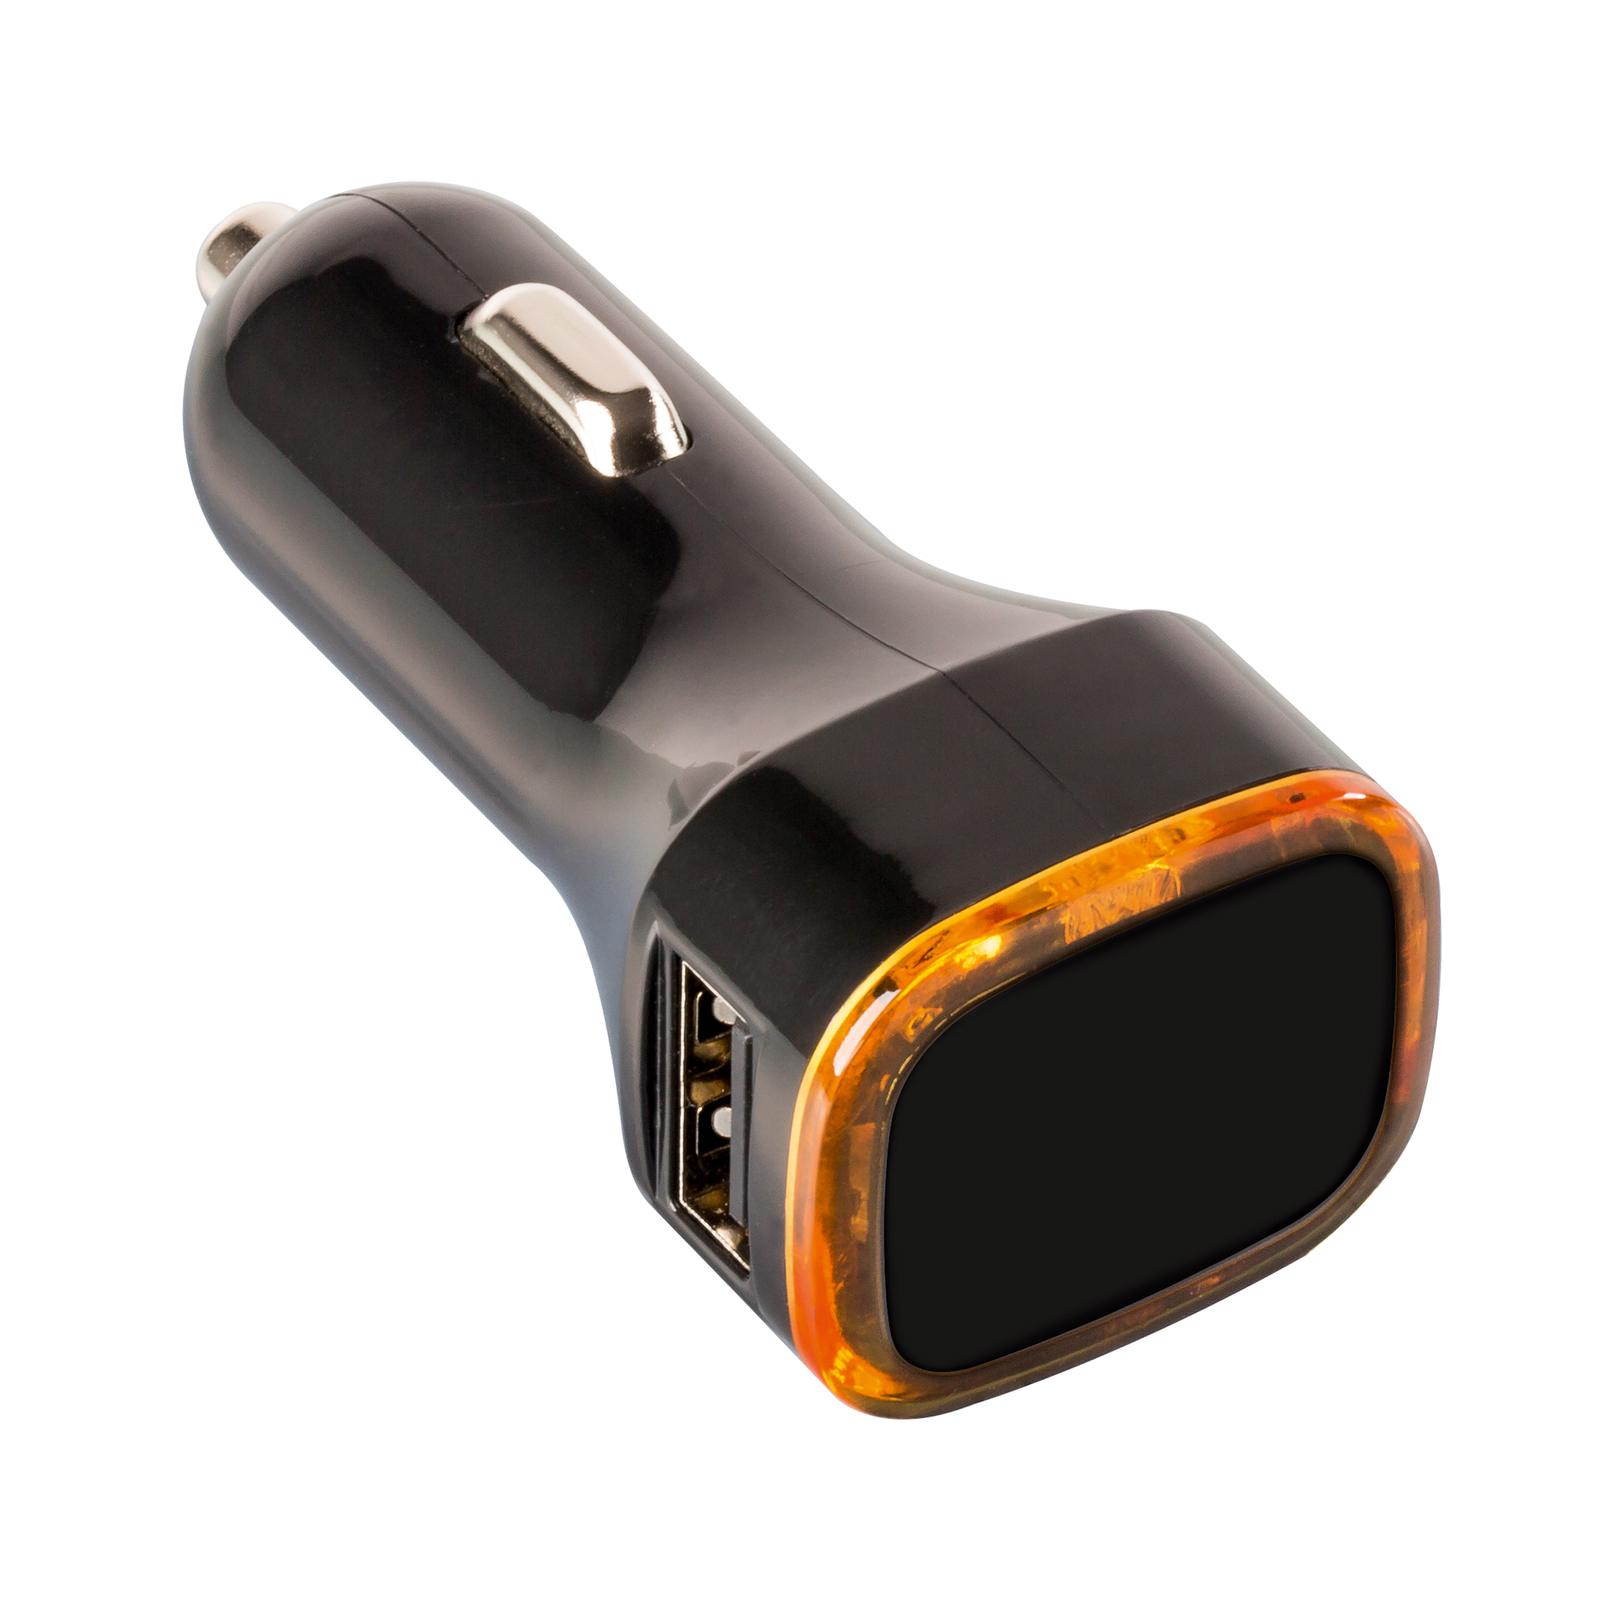 Engraved USB car charger adapter RC 500